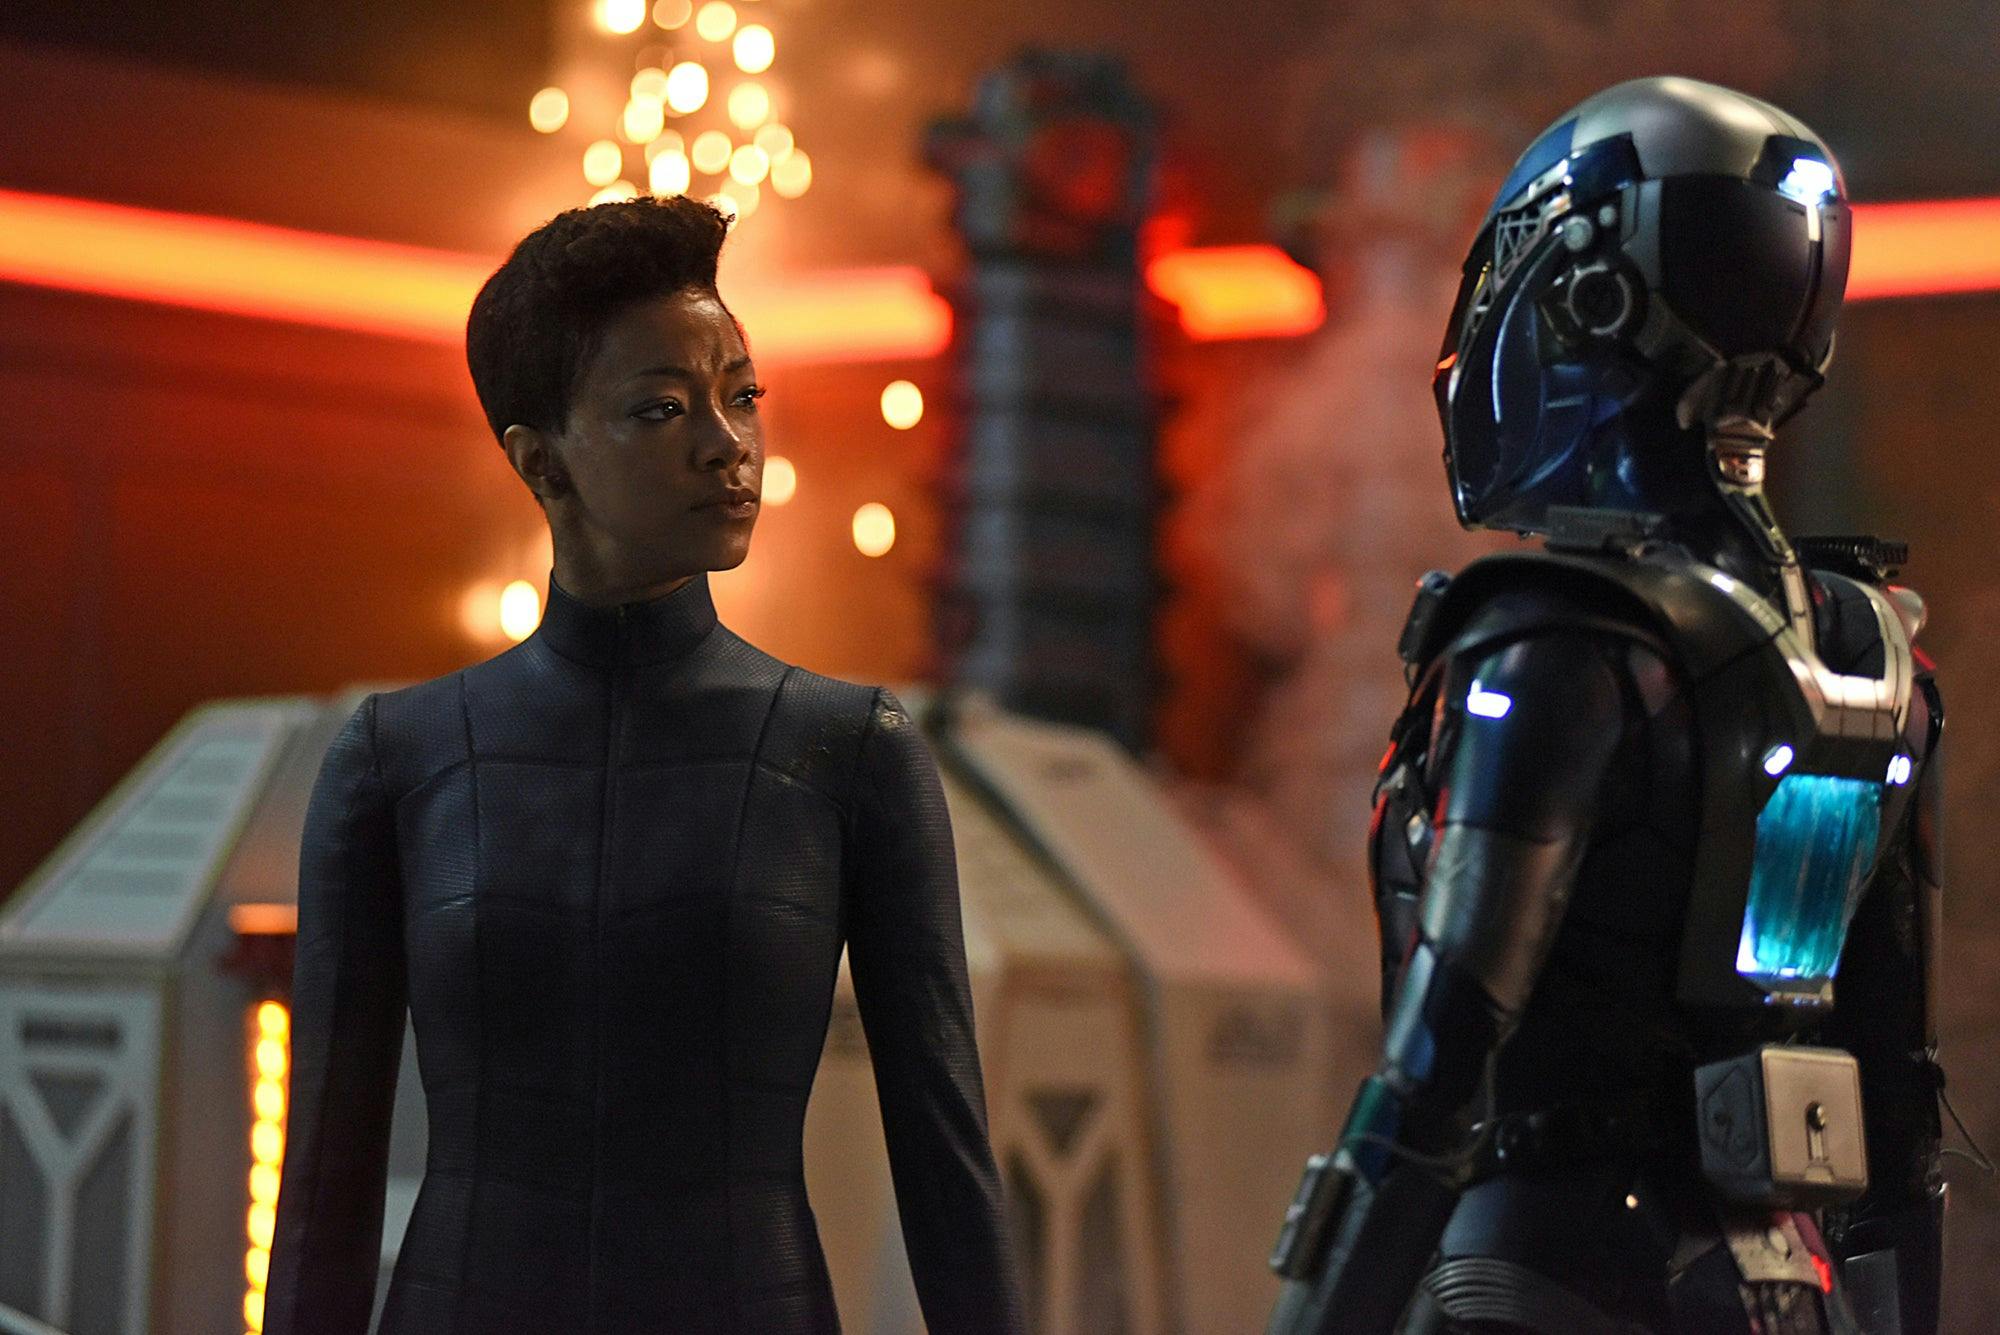 Michael Burnham looks over at the Red Angel suit stealing herself for the journey ahead of her in 'Such Sweet Sorrow, Part 2'